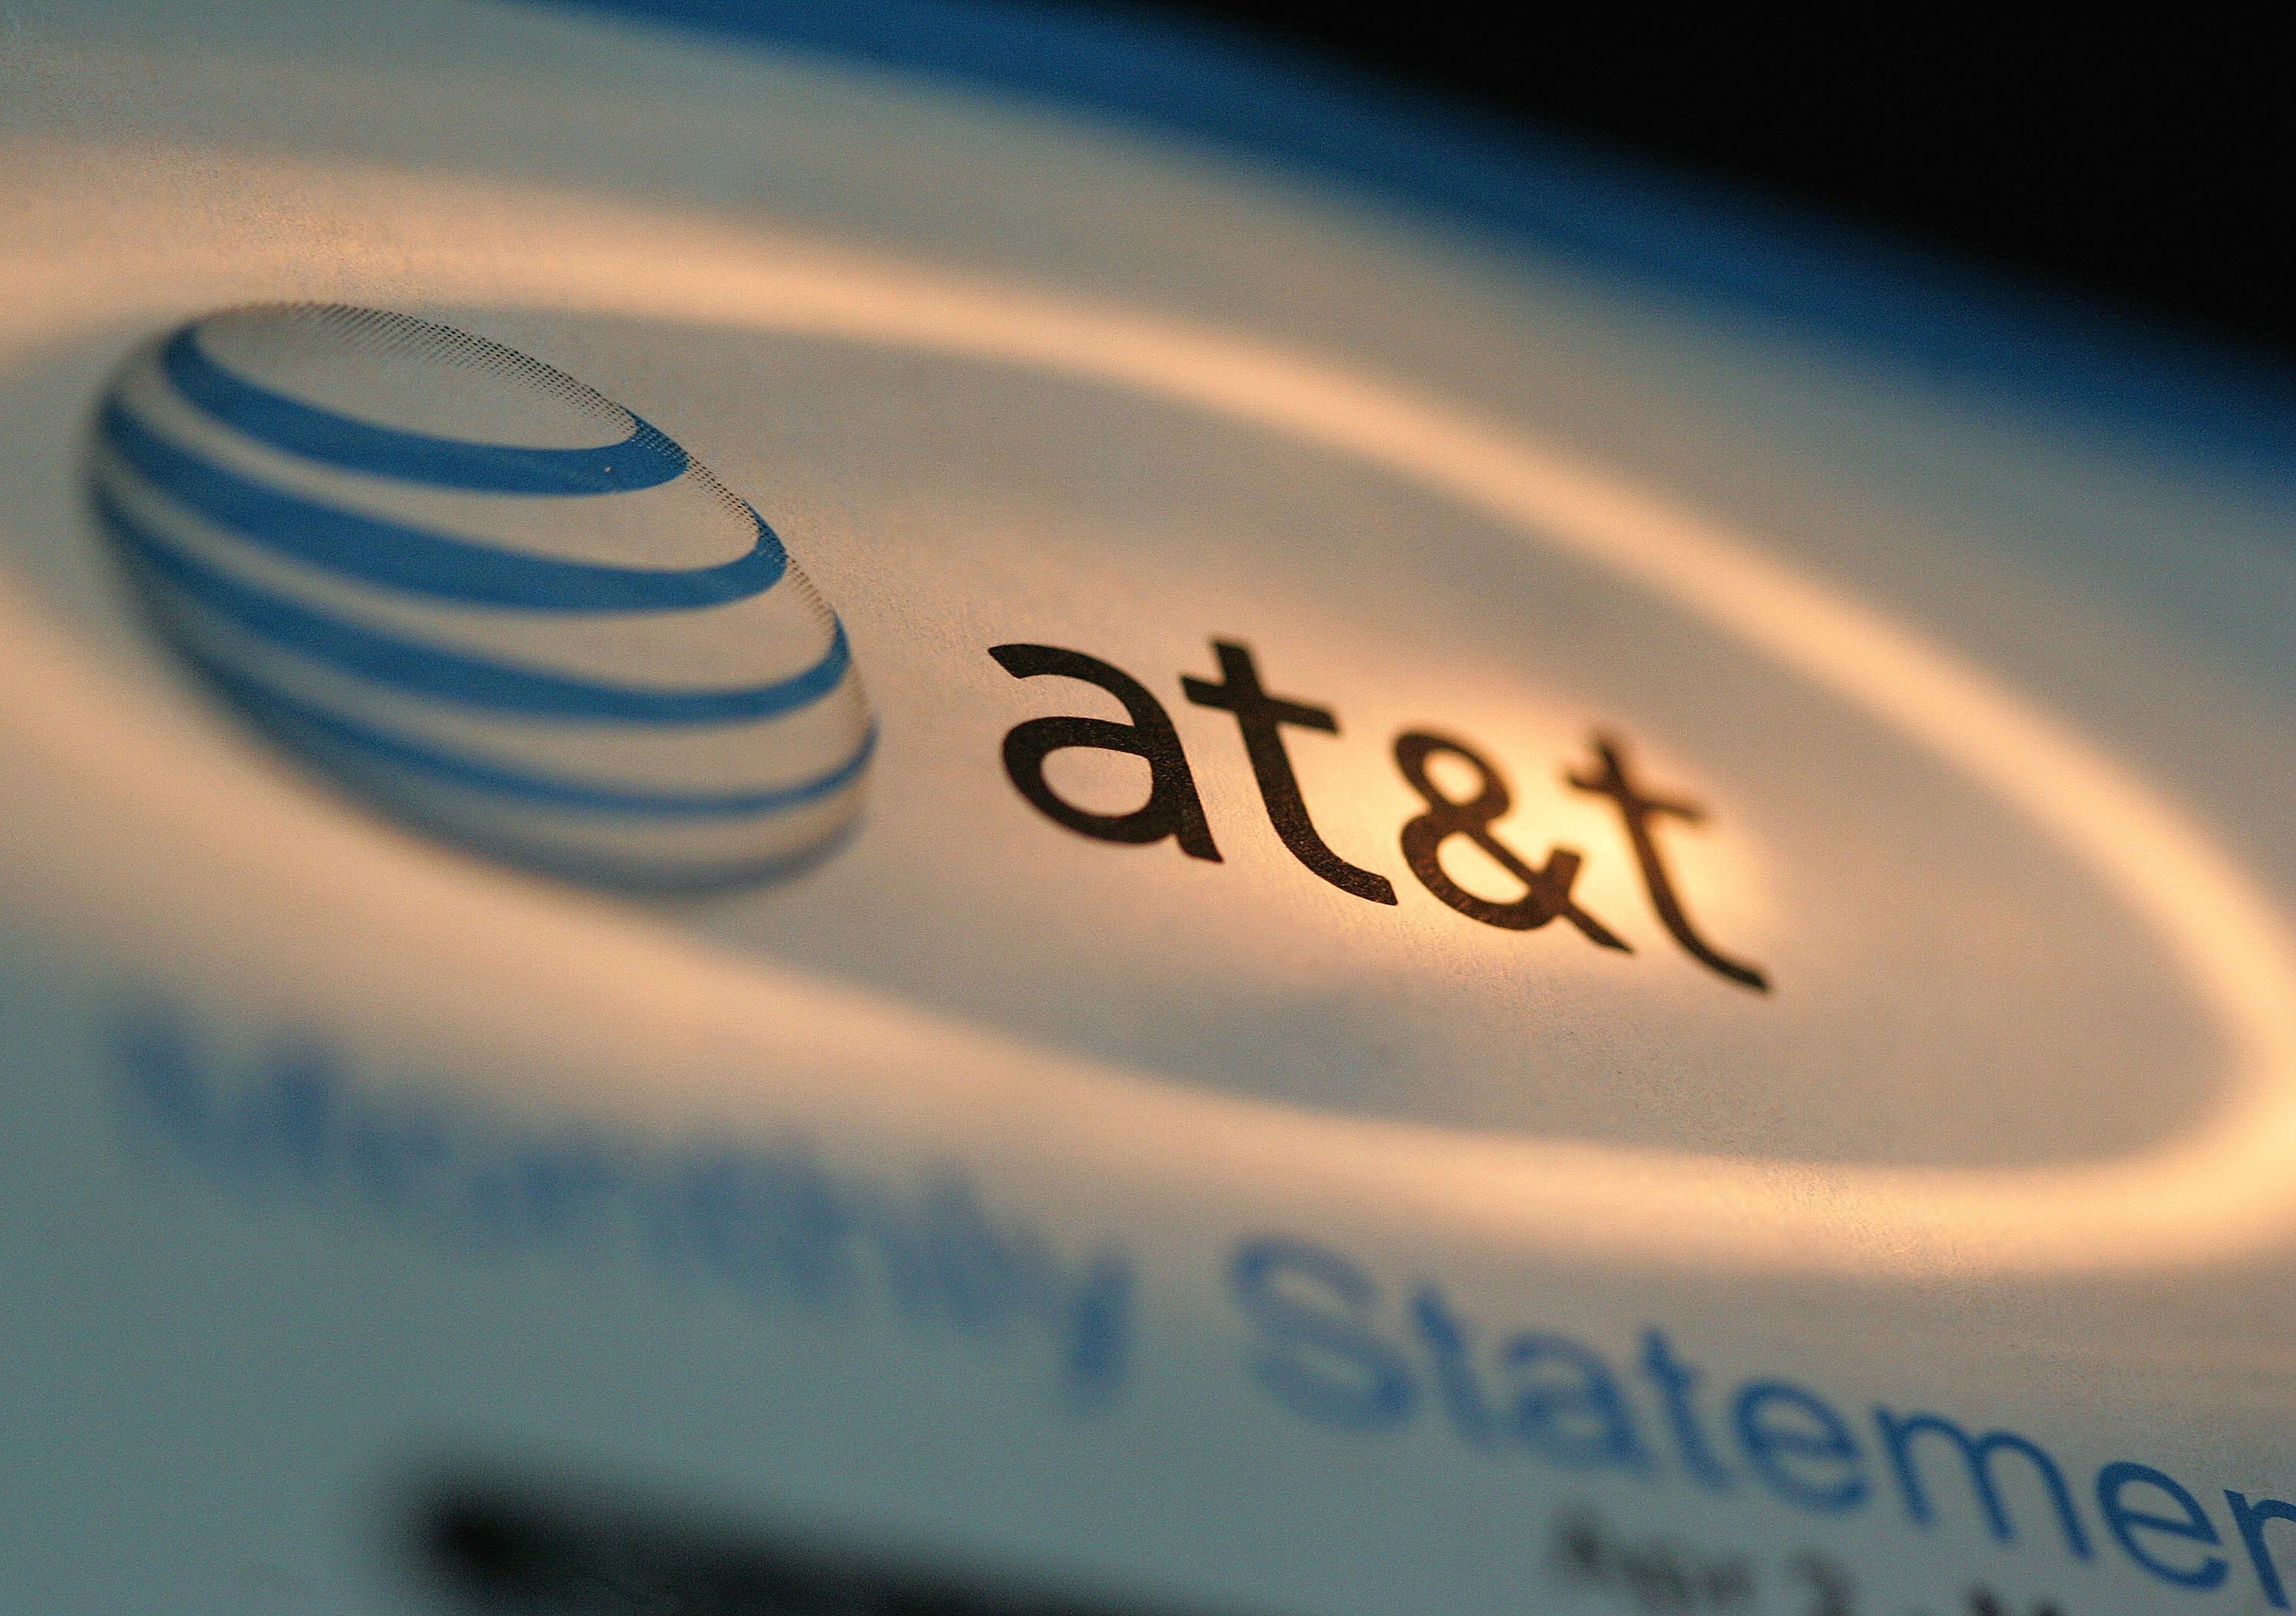 The AT&T logo is seen atop a phone bill. (Getty)